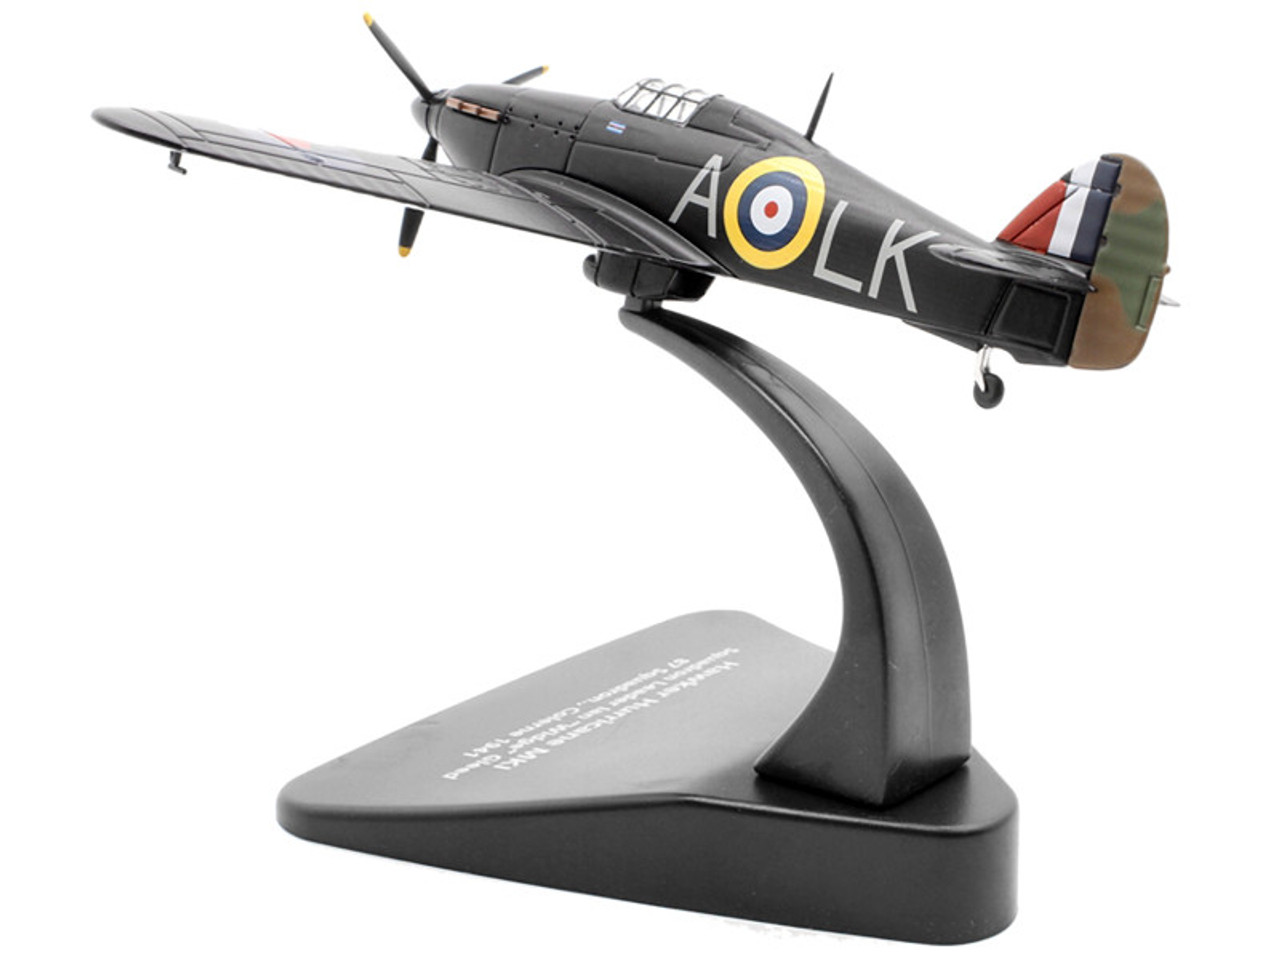 Hawker Hurricane MK I Fighter Plane Squadron Leader Ian "Widge" Gleed 87 Squadron. Colerne England (1941) "Oxford Aviation" Series 1/72 Diecast Model Aircraft by Oxford Diecast